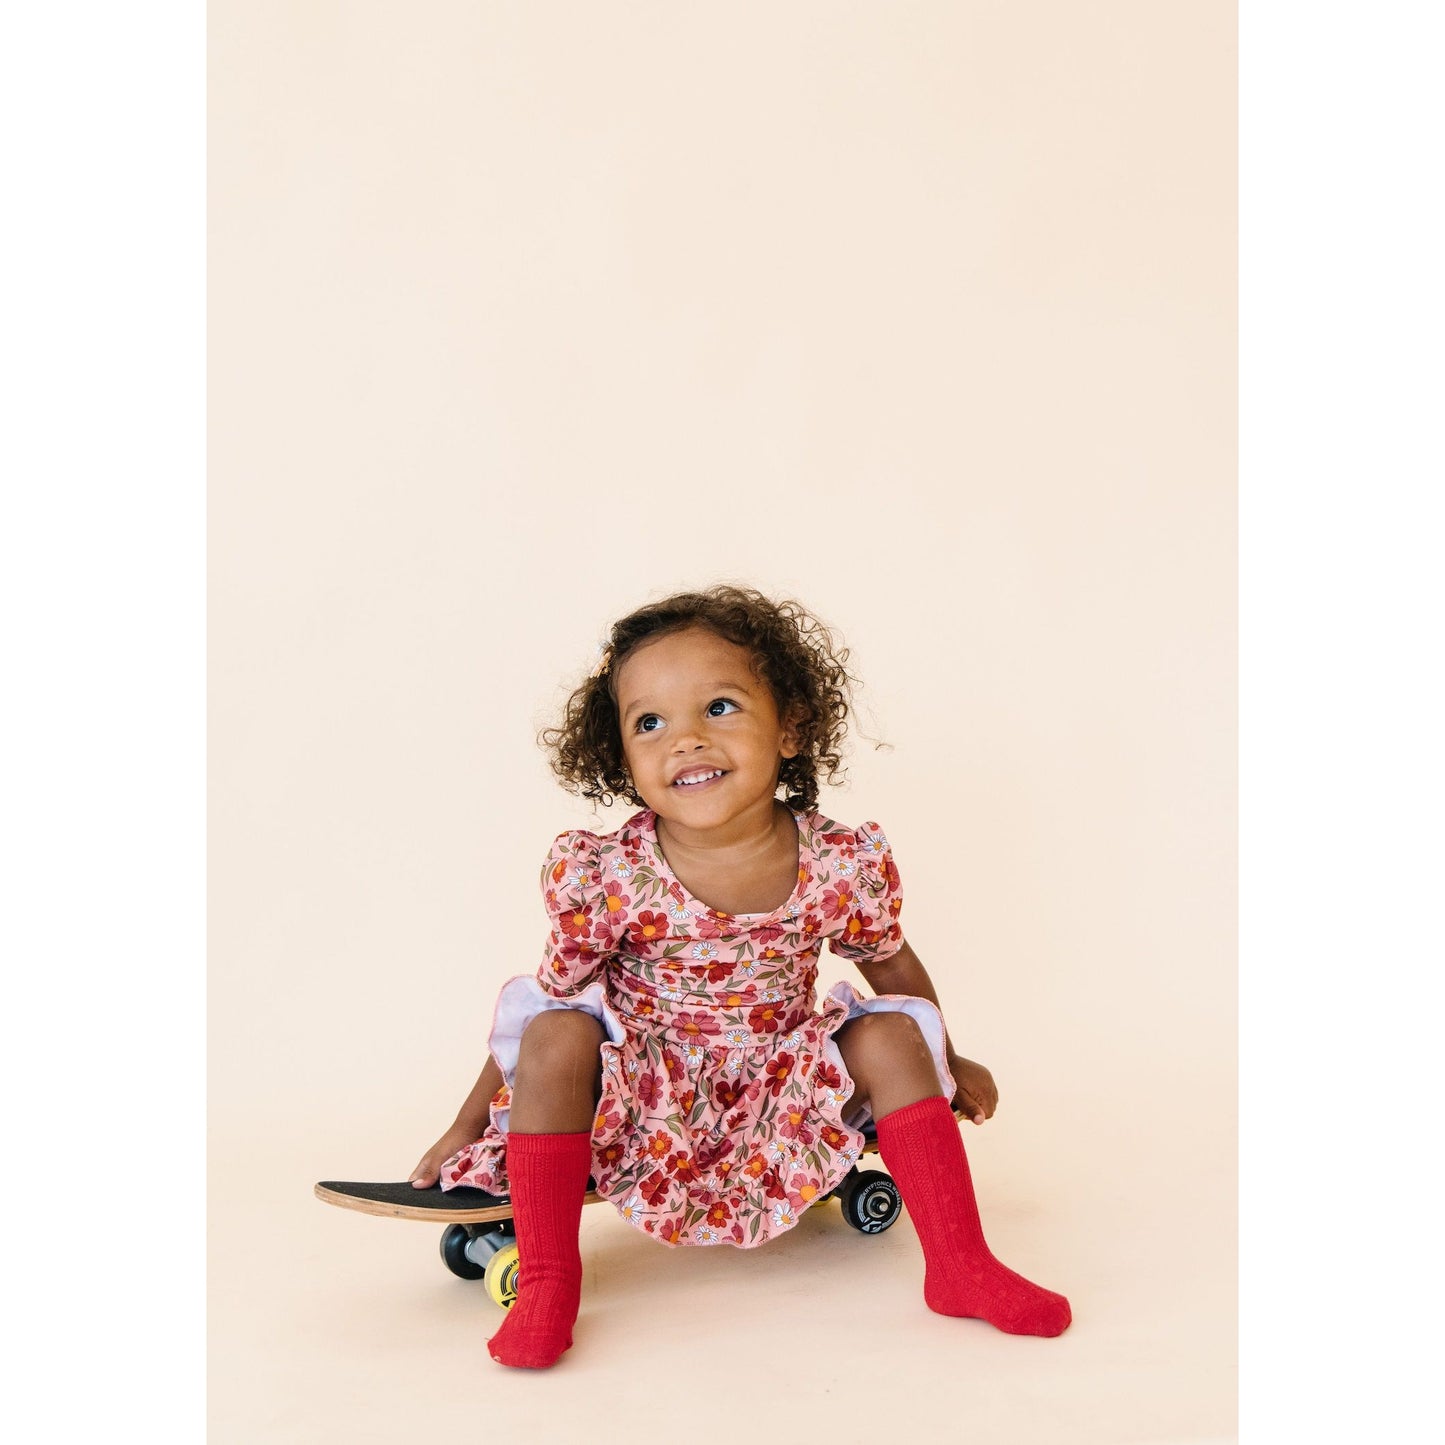 Cable Knit Knee High Socks in True Red  - Doodlebug's Children's Boutique